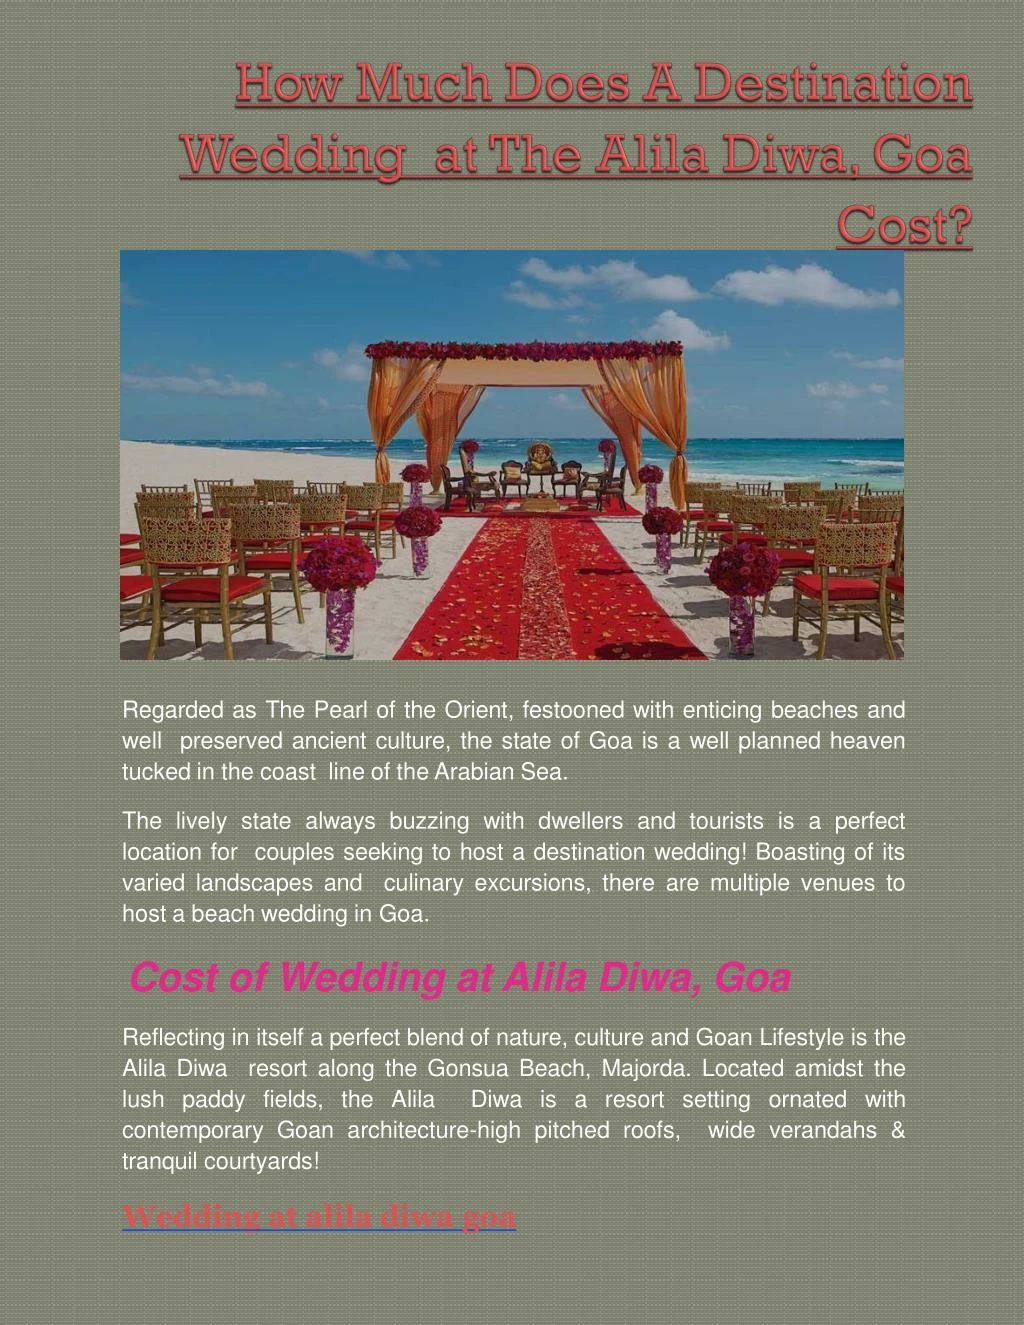 how much does a destination wedding at the alila diwa goa cost